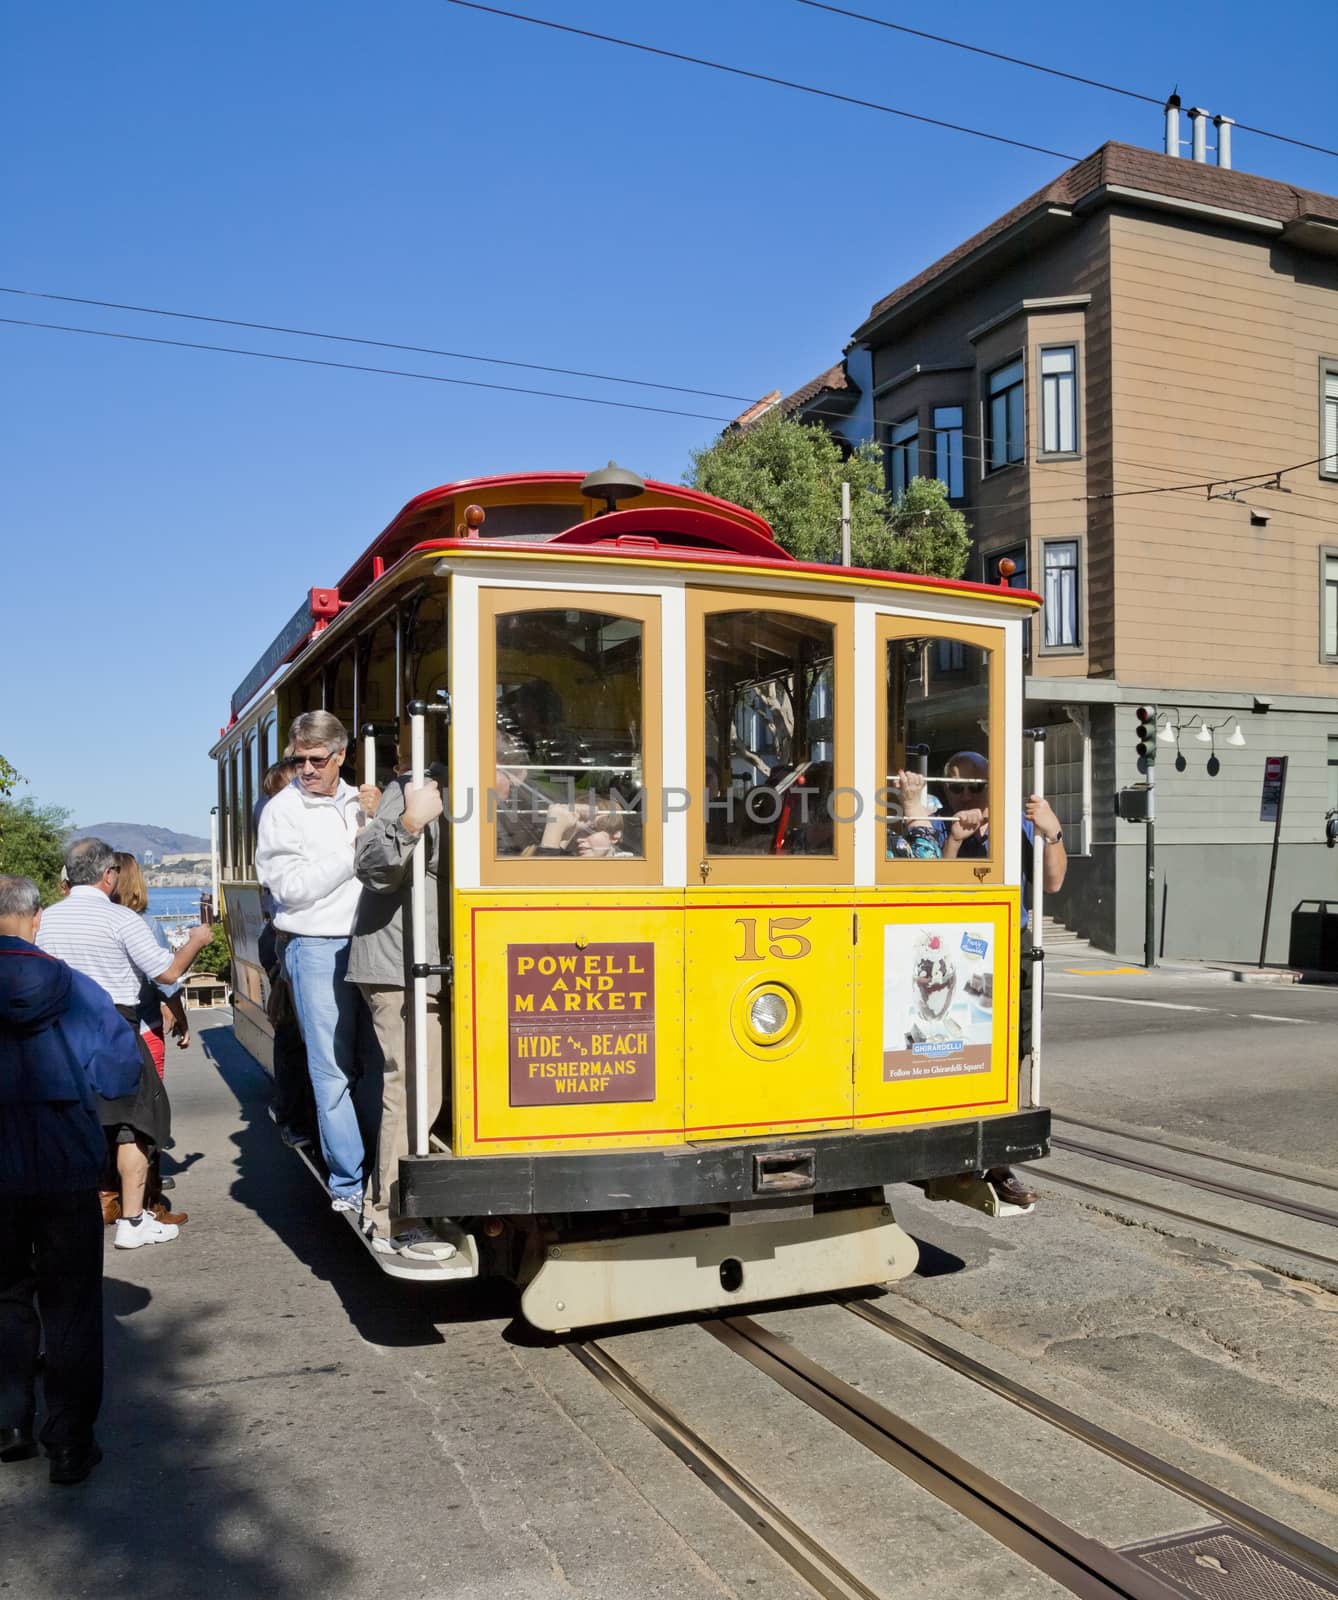 SAN FRANCISCO - The Cable car tram by hanusst